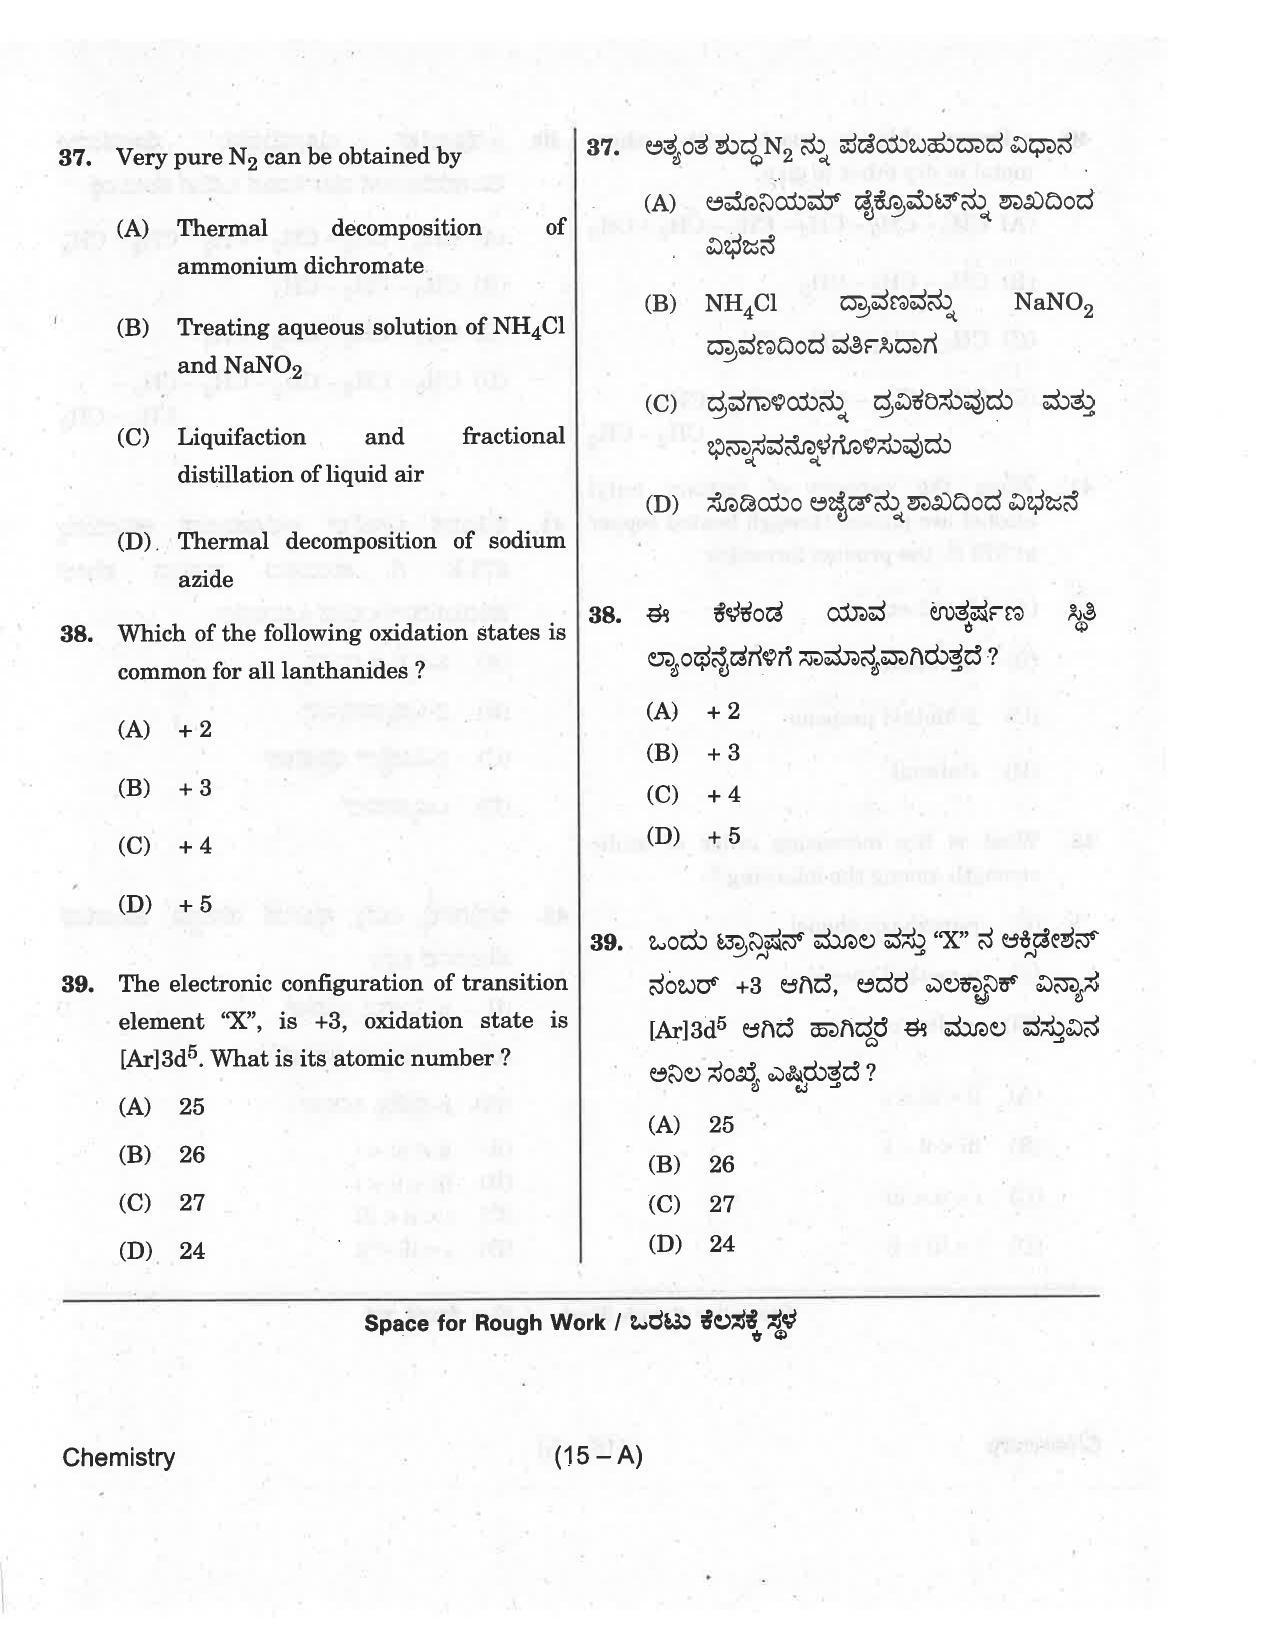 KCET Chemistry 2018 Question Papers - Page 15